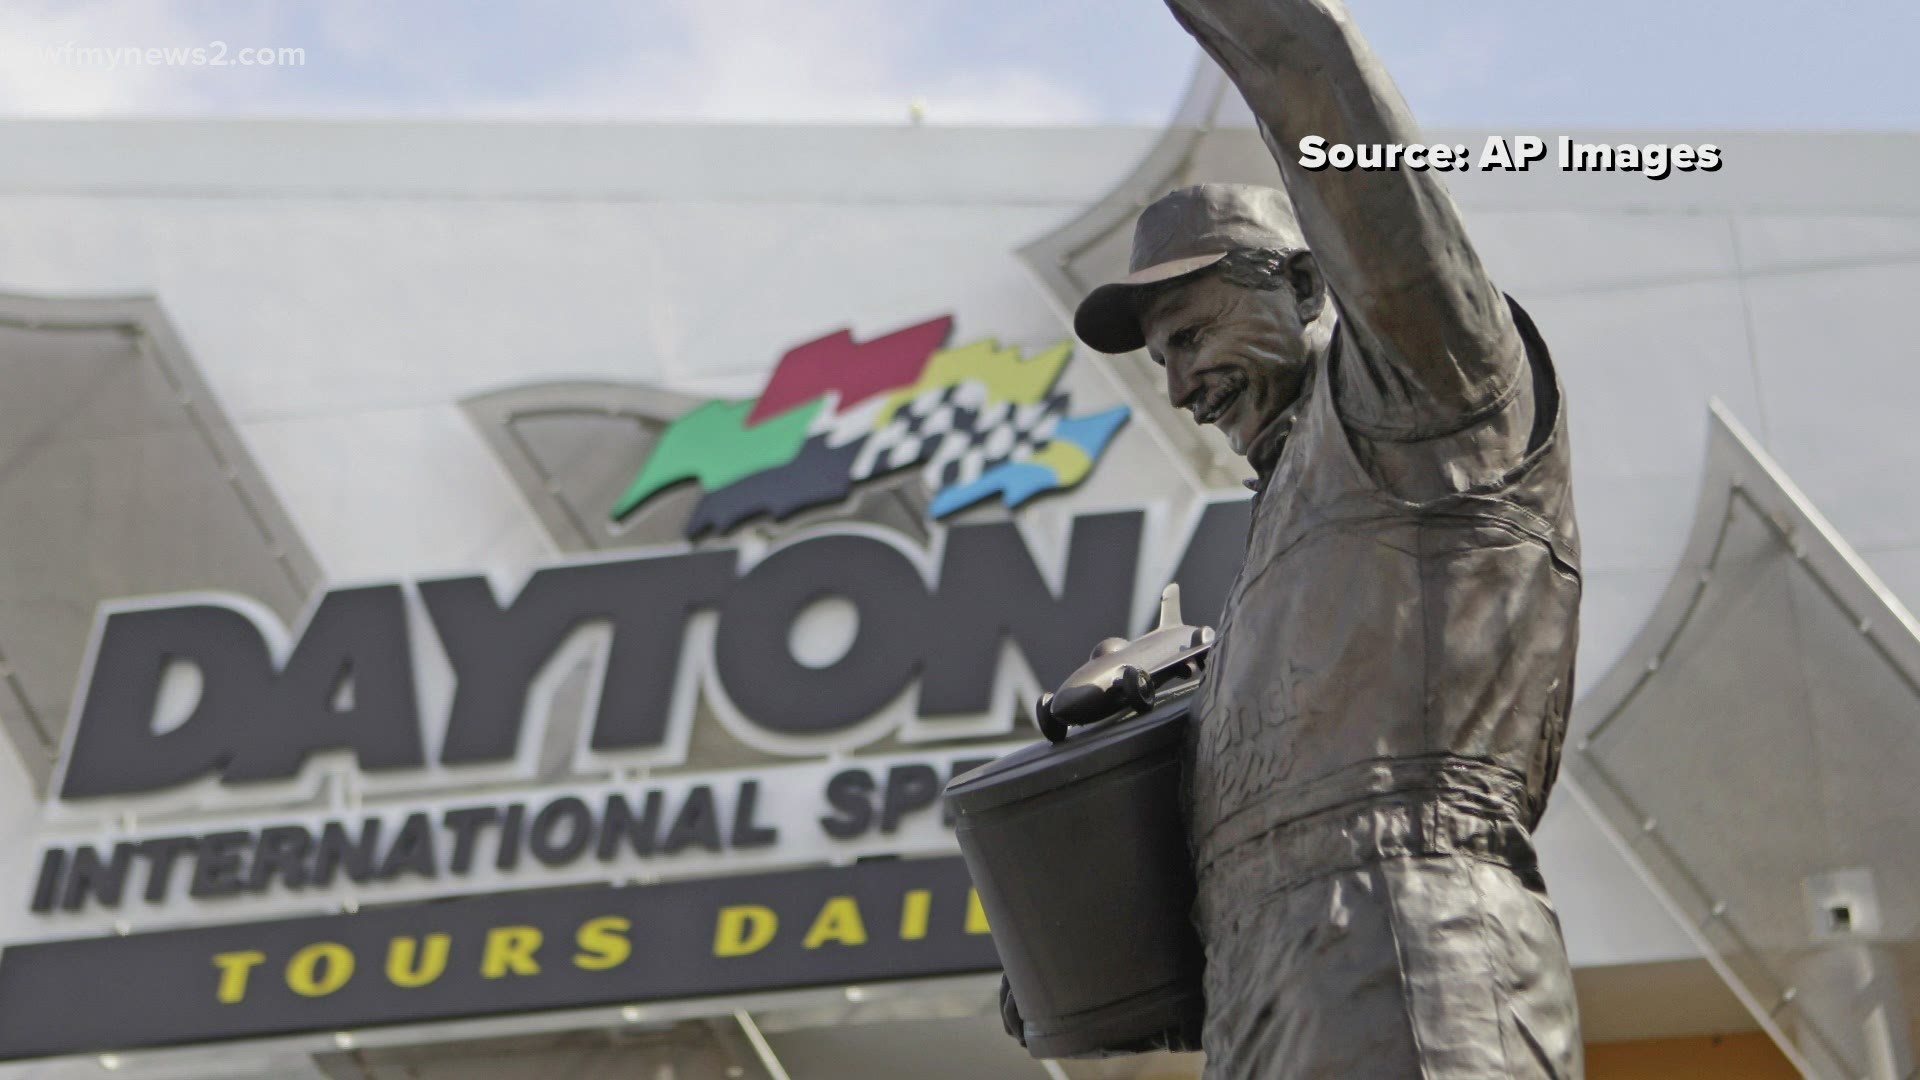 This year’s Daytona 500 marks the 20th anniversary since the fatal crash that killed Dale Earnhardt.